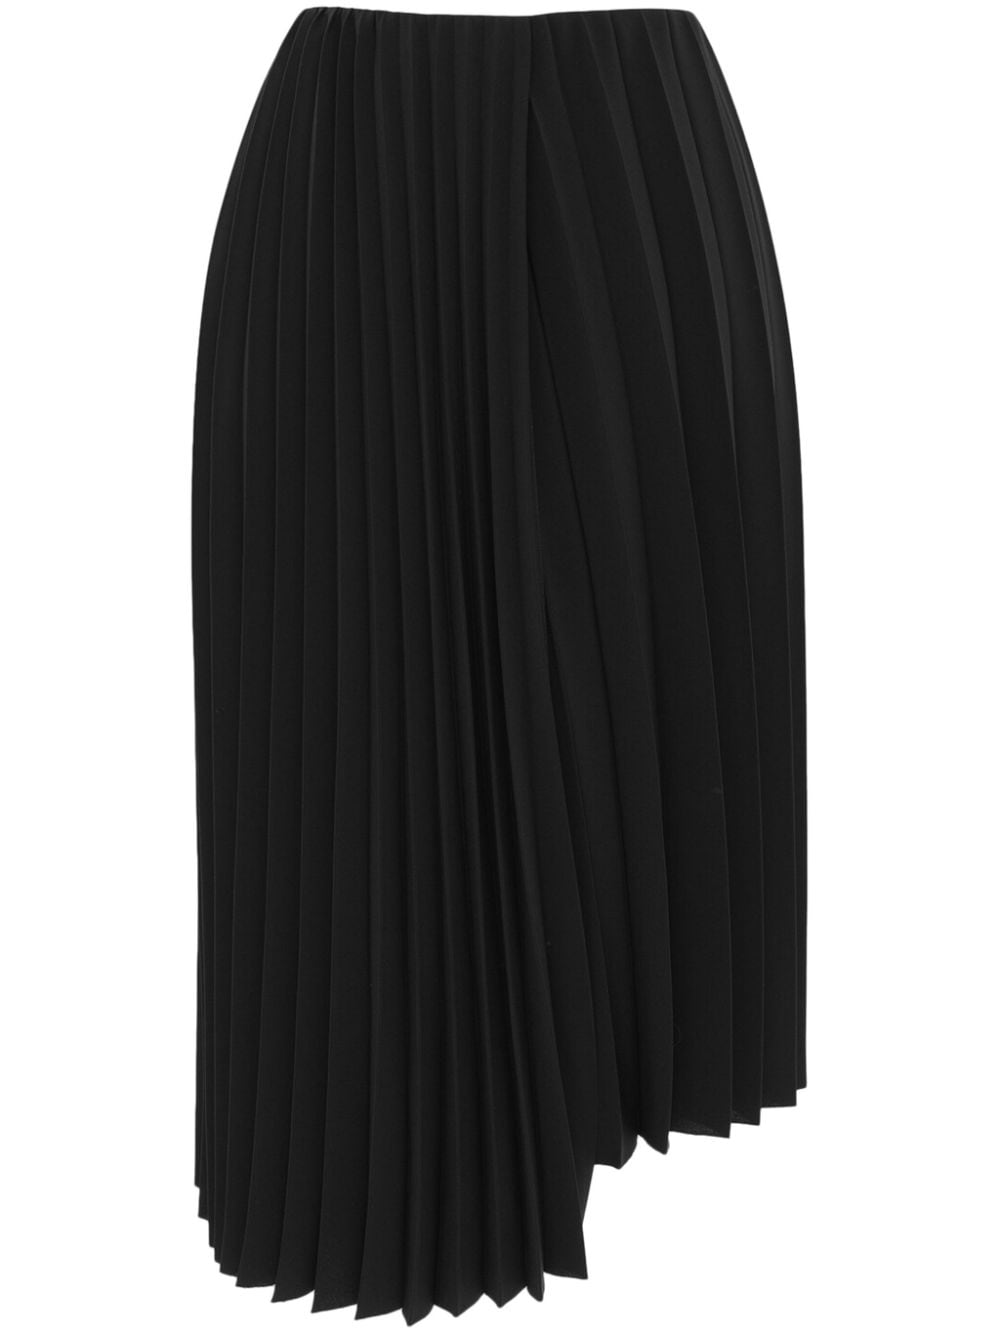 Sophisticated and Flattering Asymmetric Pleated Midi Skirt